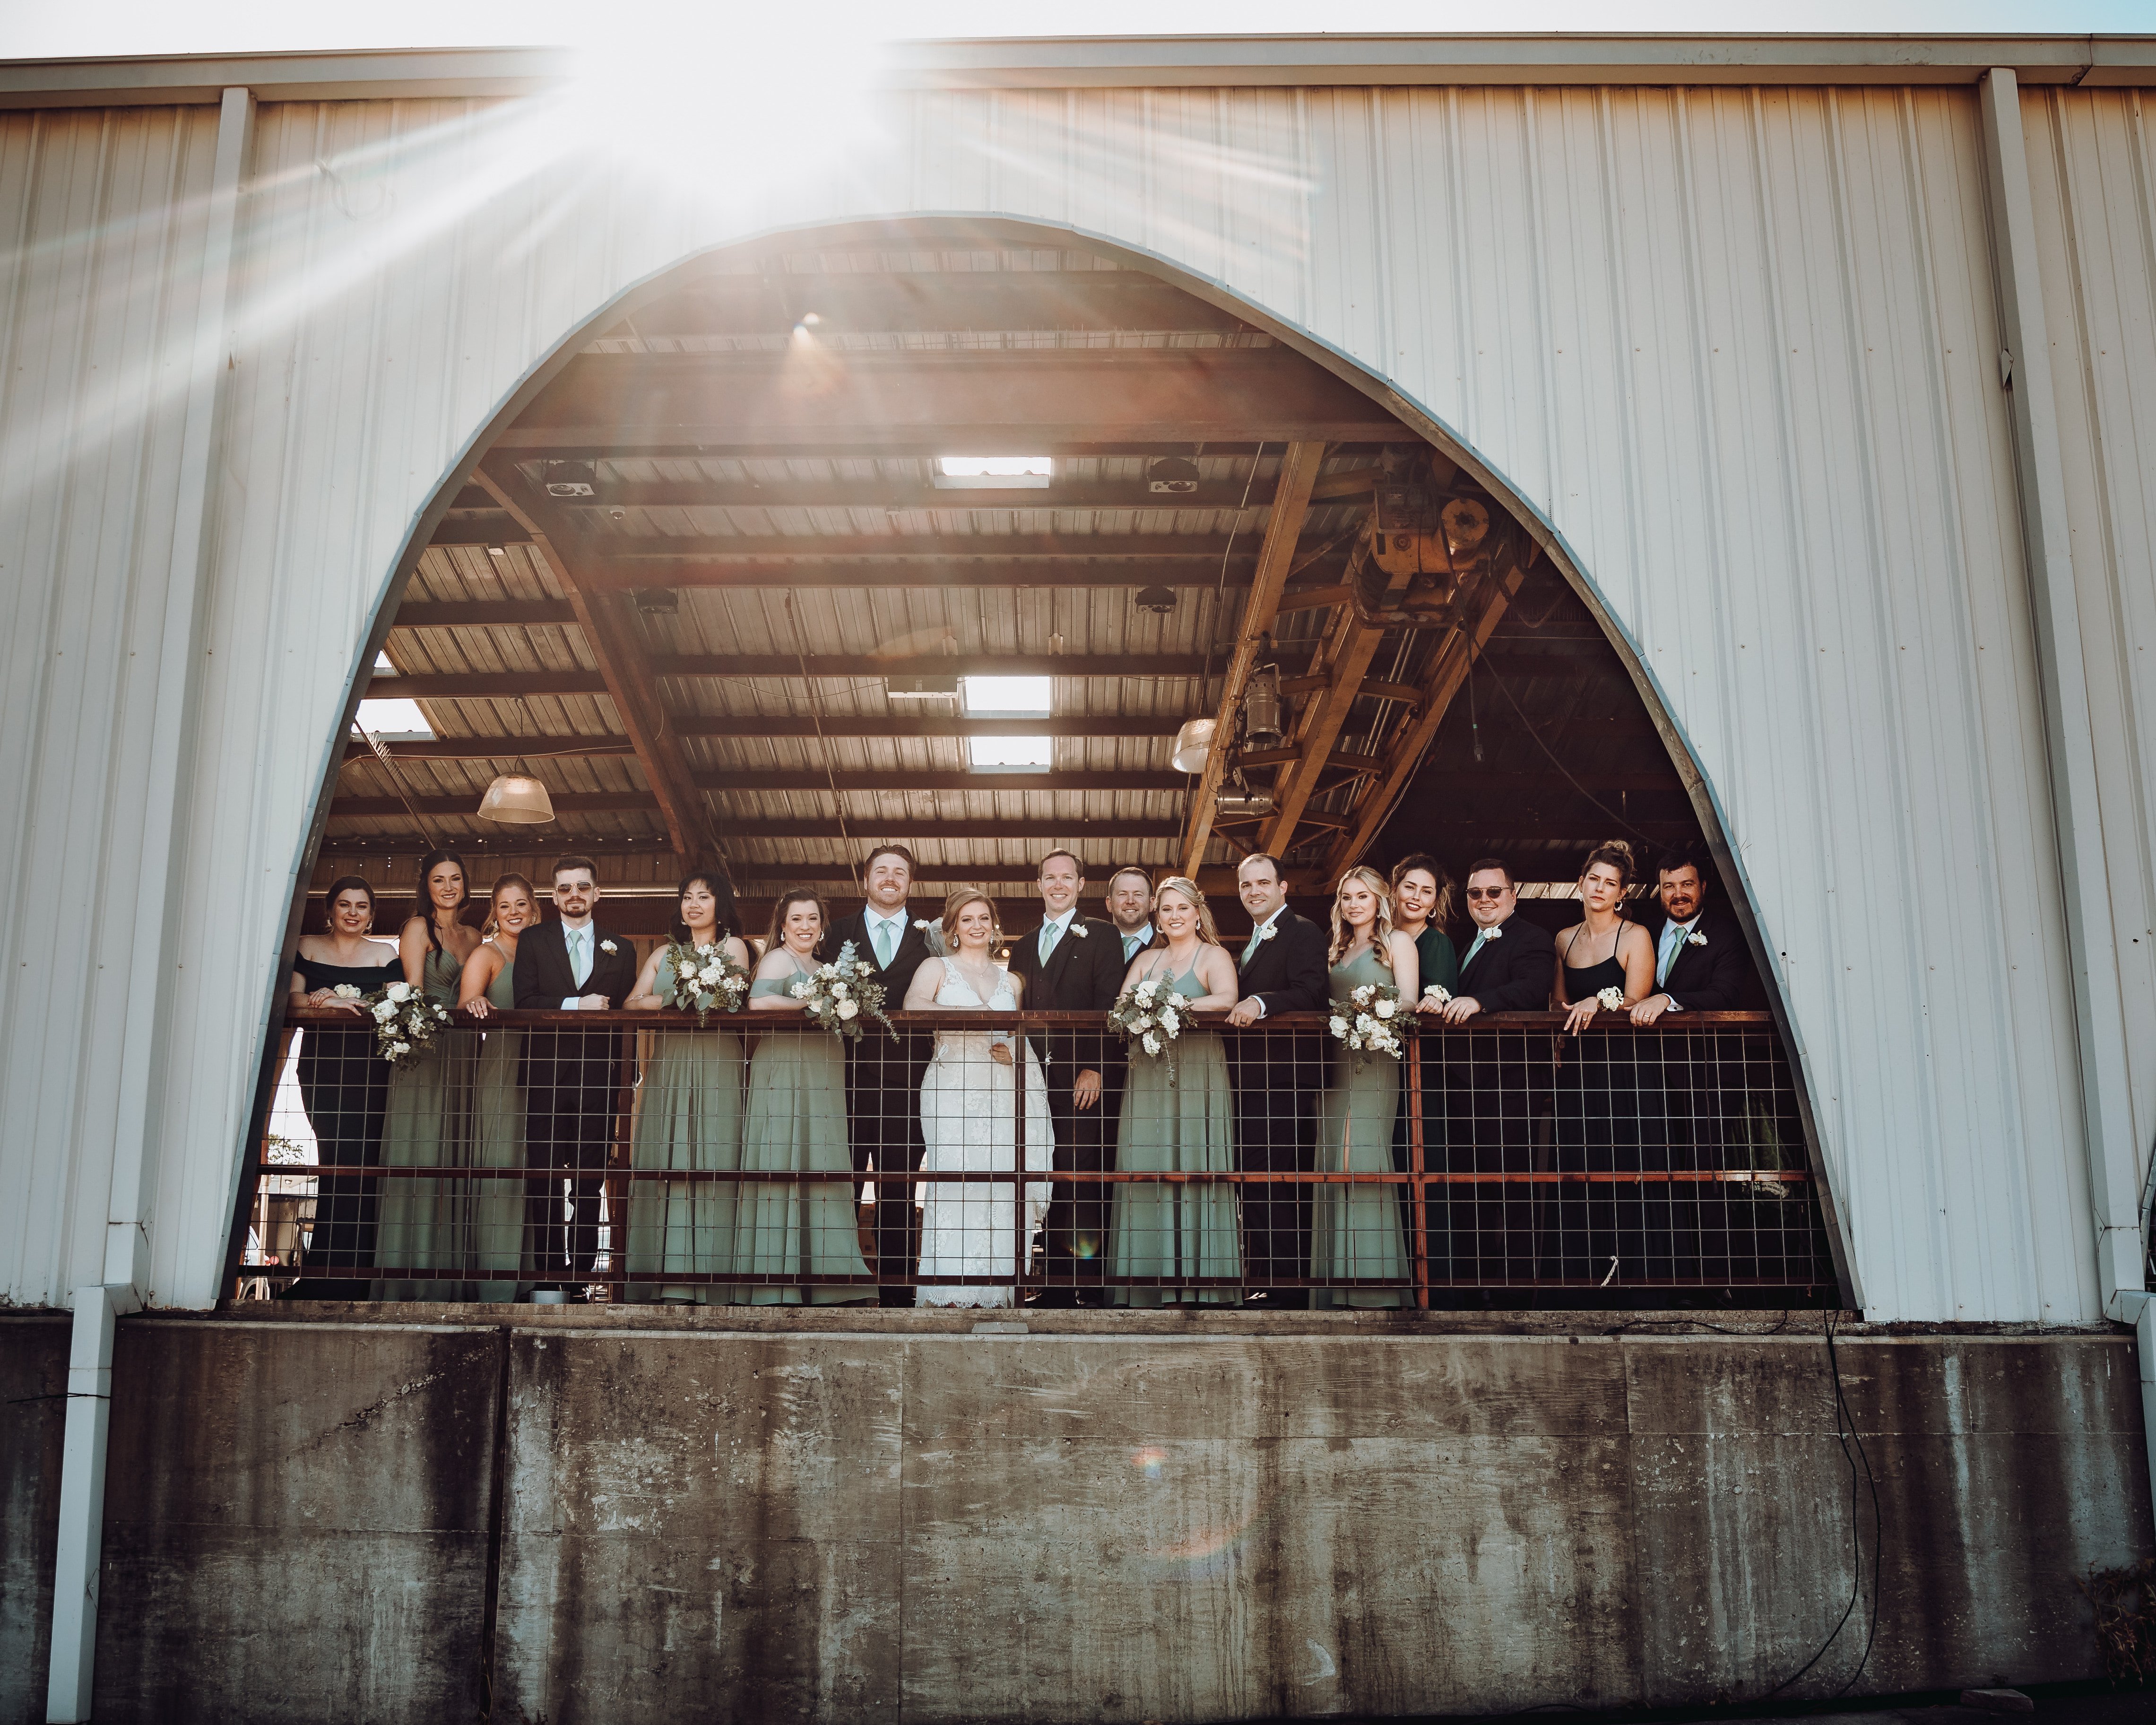 A bride and groom pose with their wedding party after their wedding ceremony in Houston, TX.